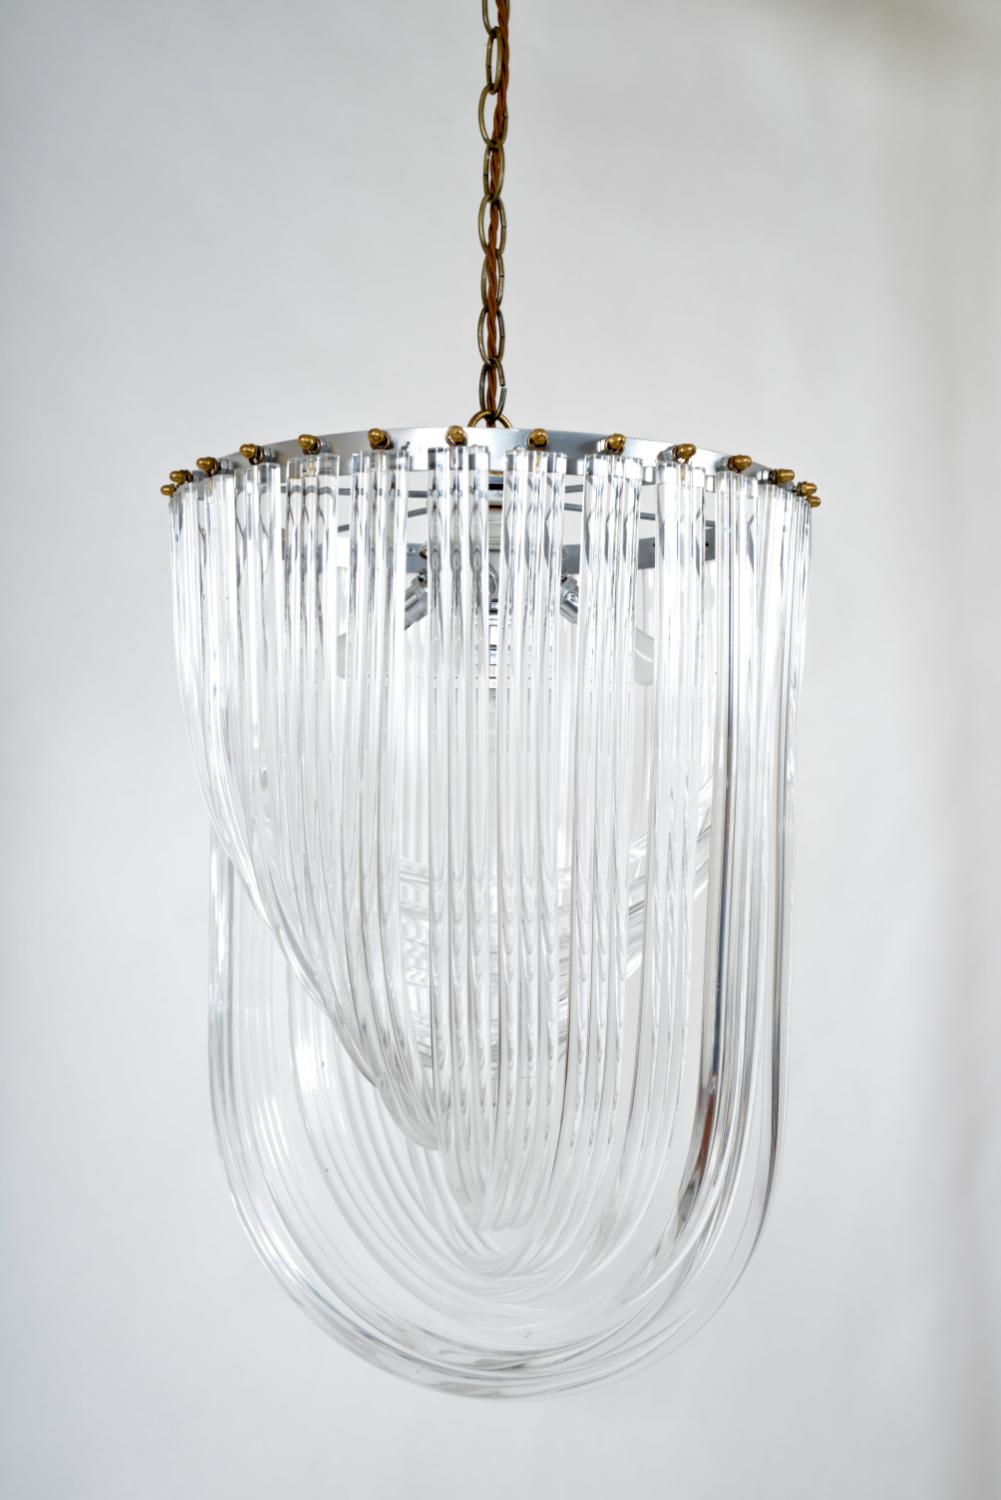 This stunning 1970s American Lucite ribbon and brass chandelier comprises of U-shaped thick bands of cascading Lucite in different lengths that are suspended from a chrome frame with brass fixings. The large Lucite is illuminated by four bulbs at